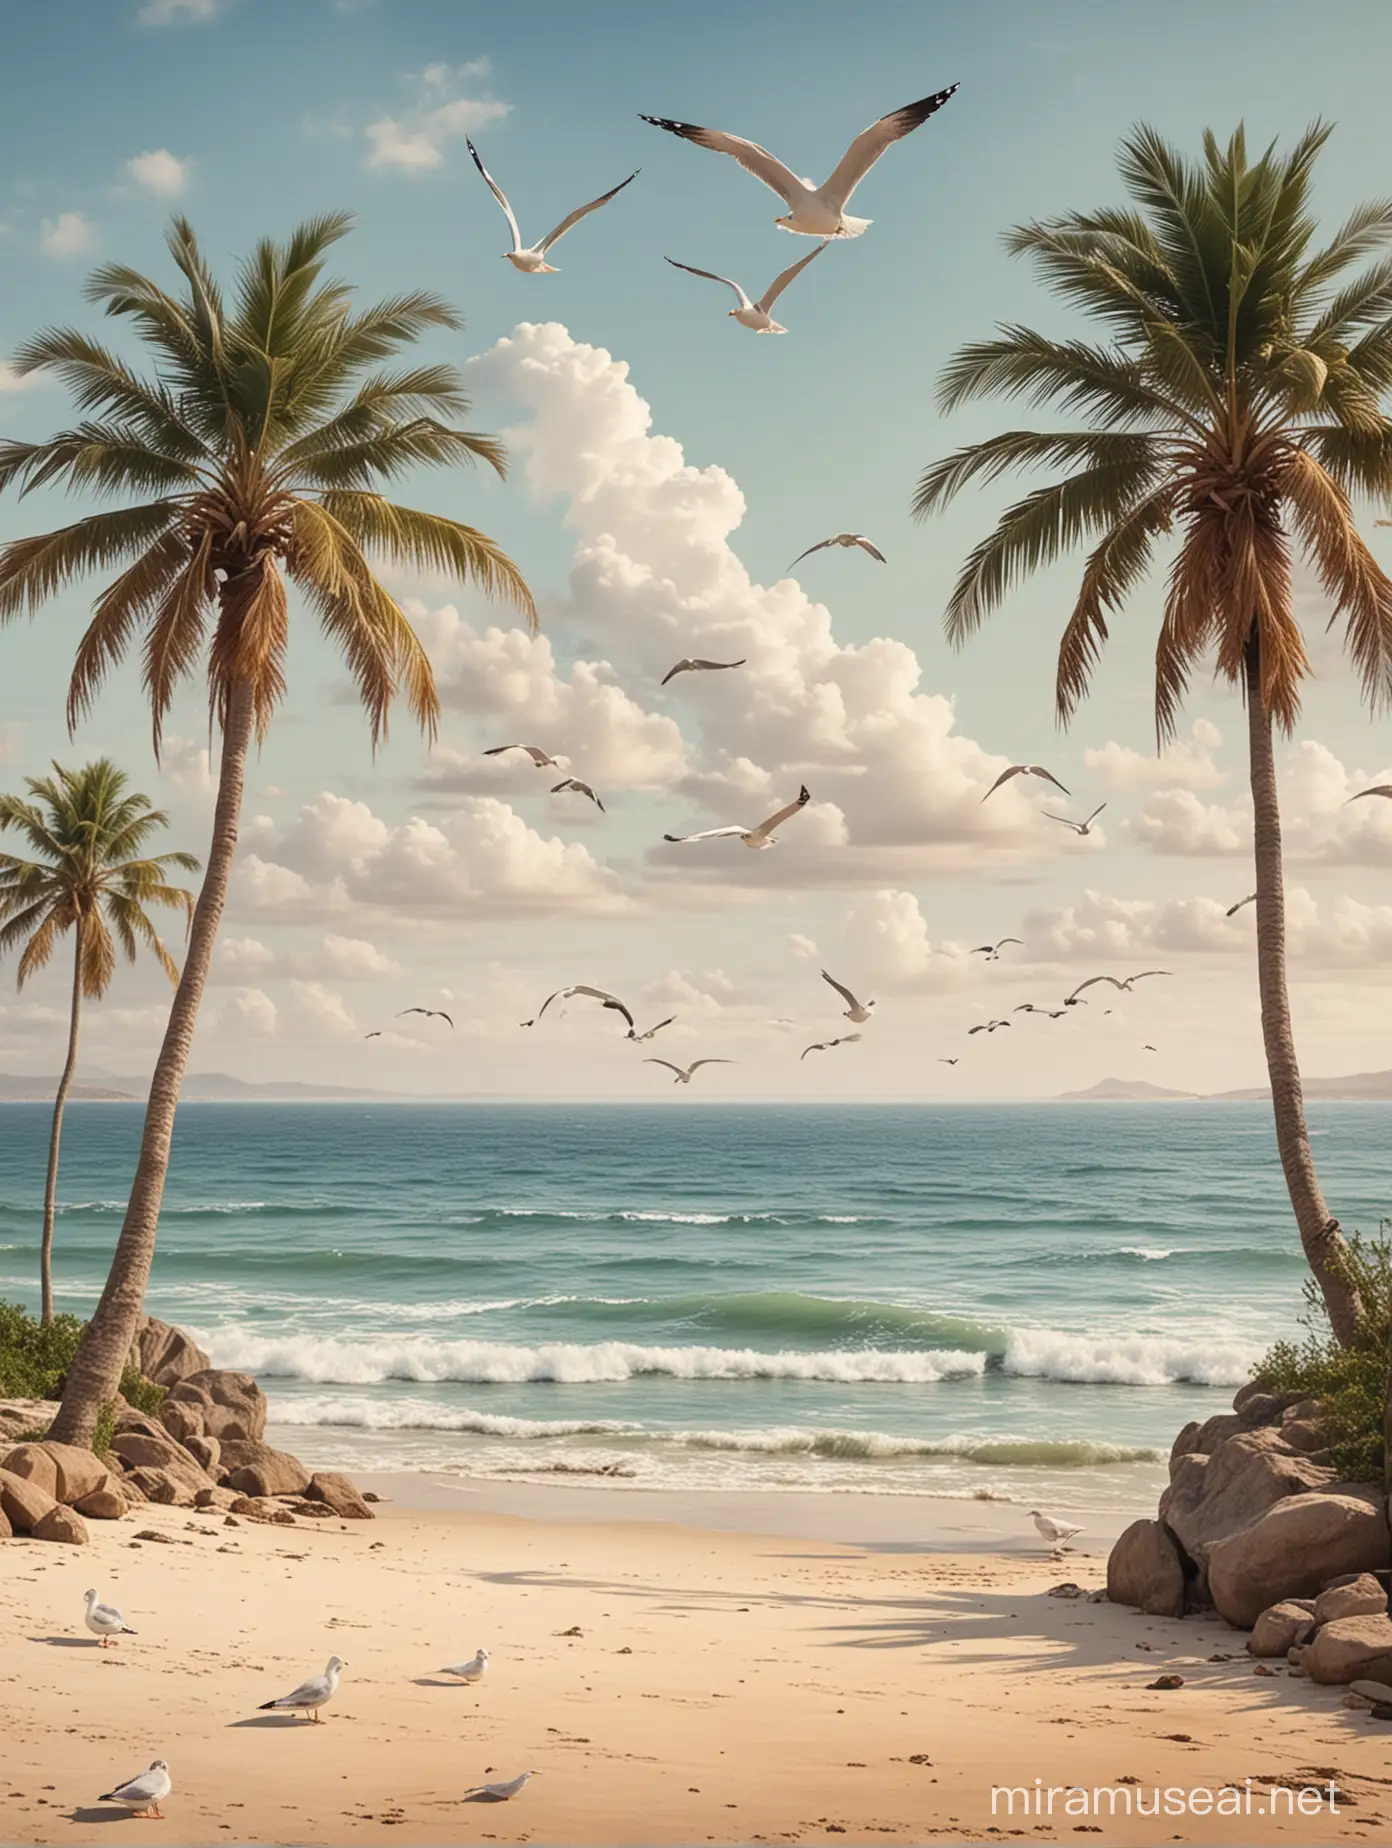 Beach Scene with Distant Seagulls and Palm Trees